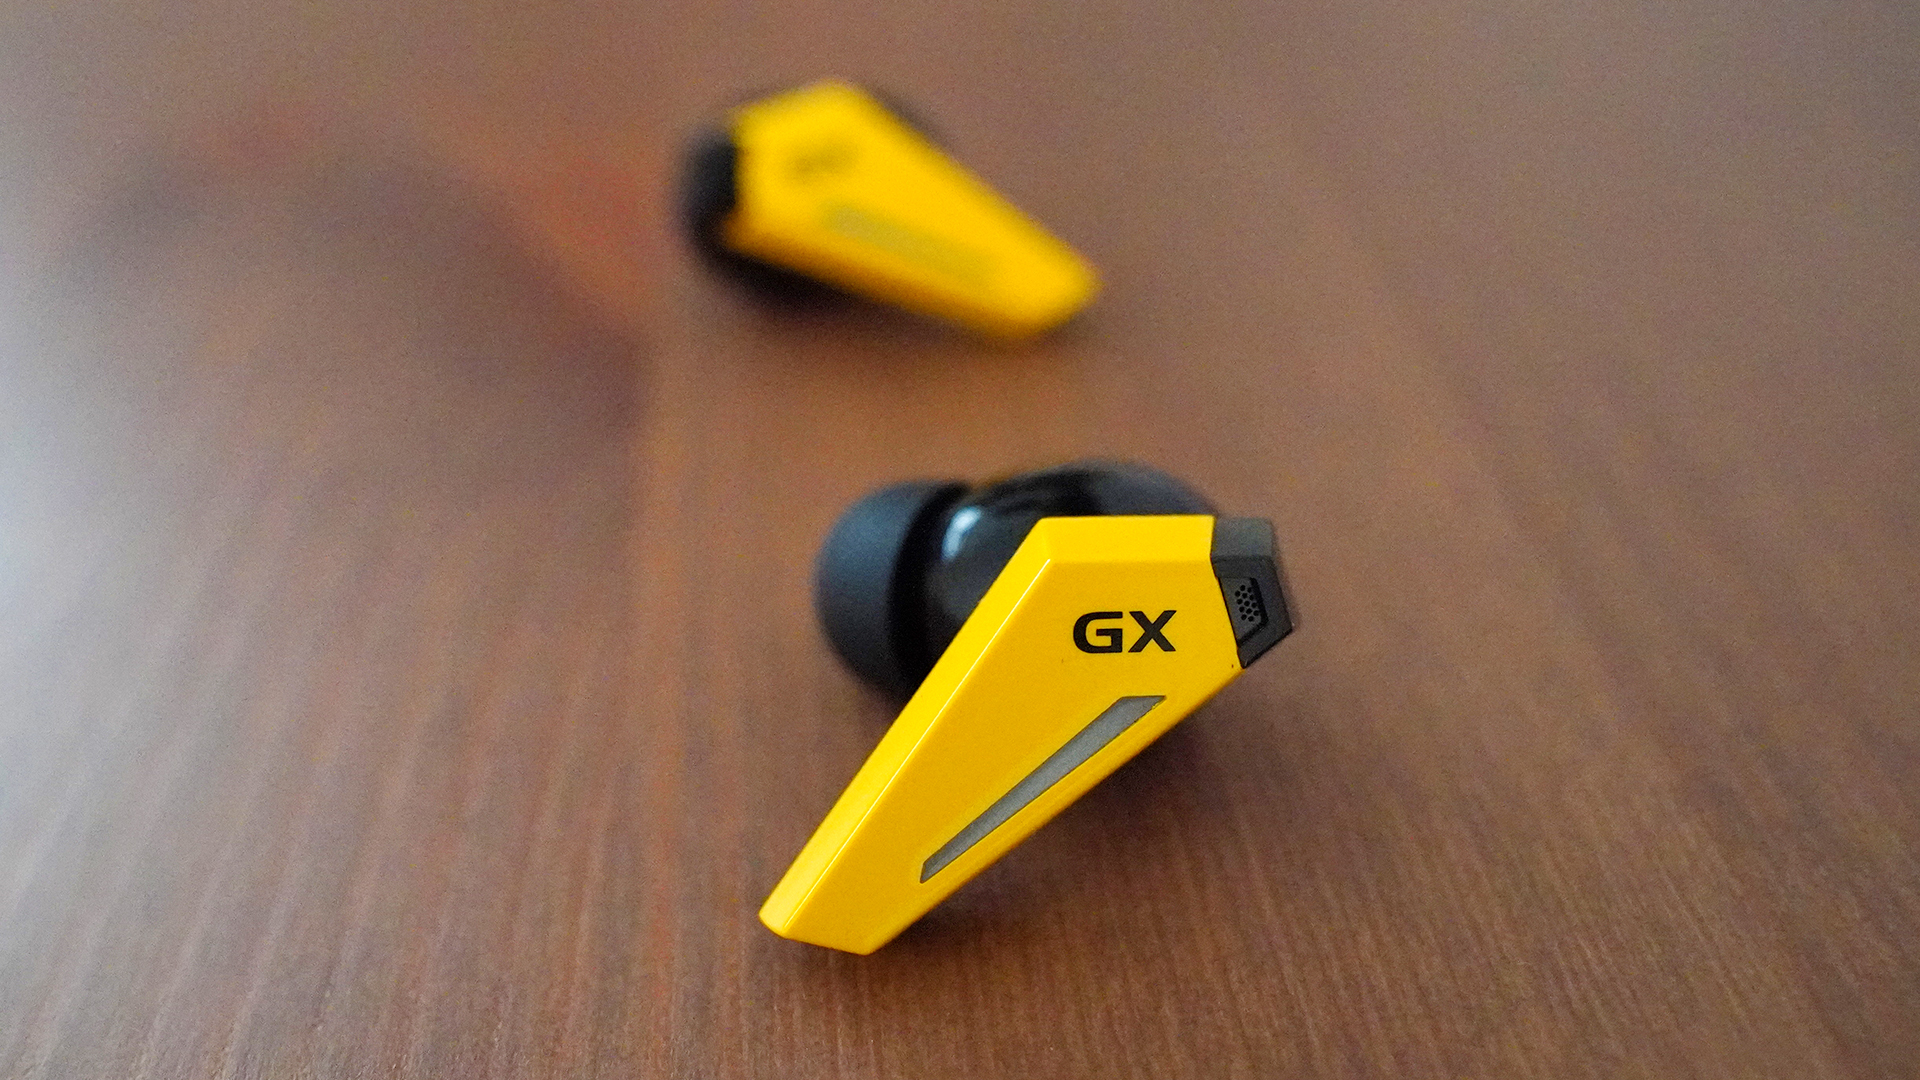 HECATE GX07 review: "Great gaming earbuds that can do everything well" |  GamesRadar+